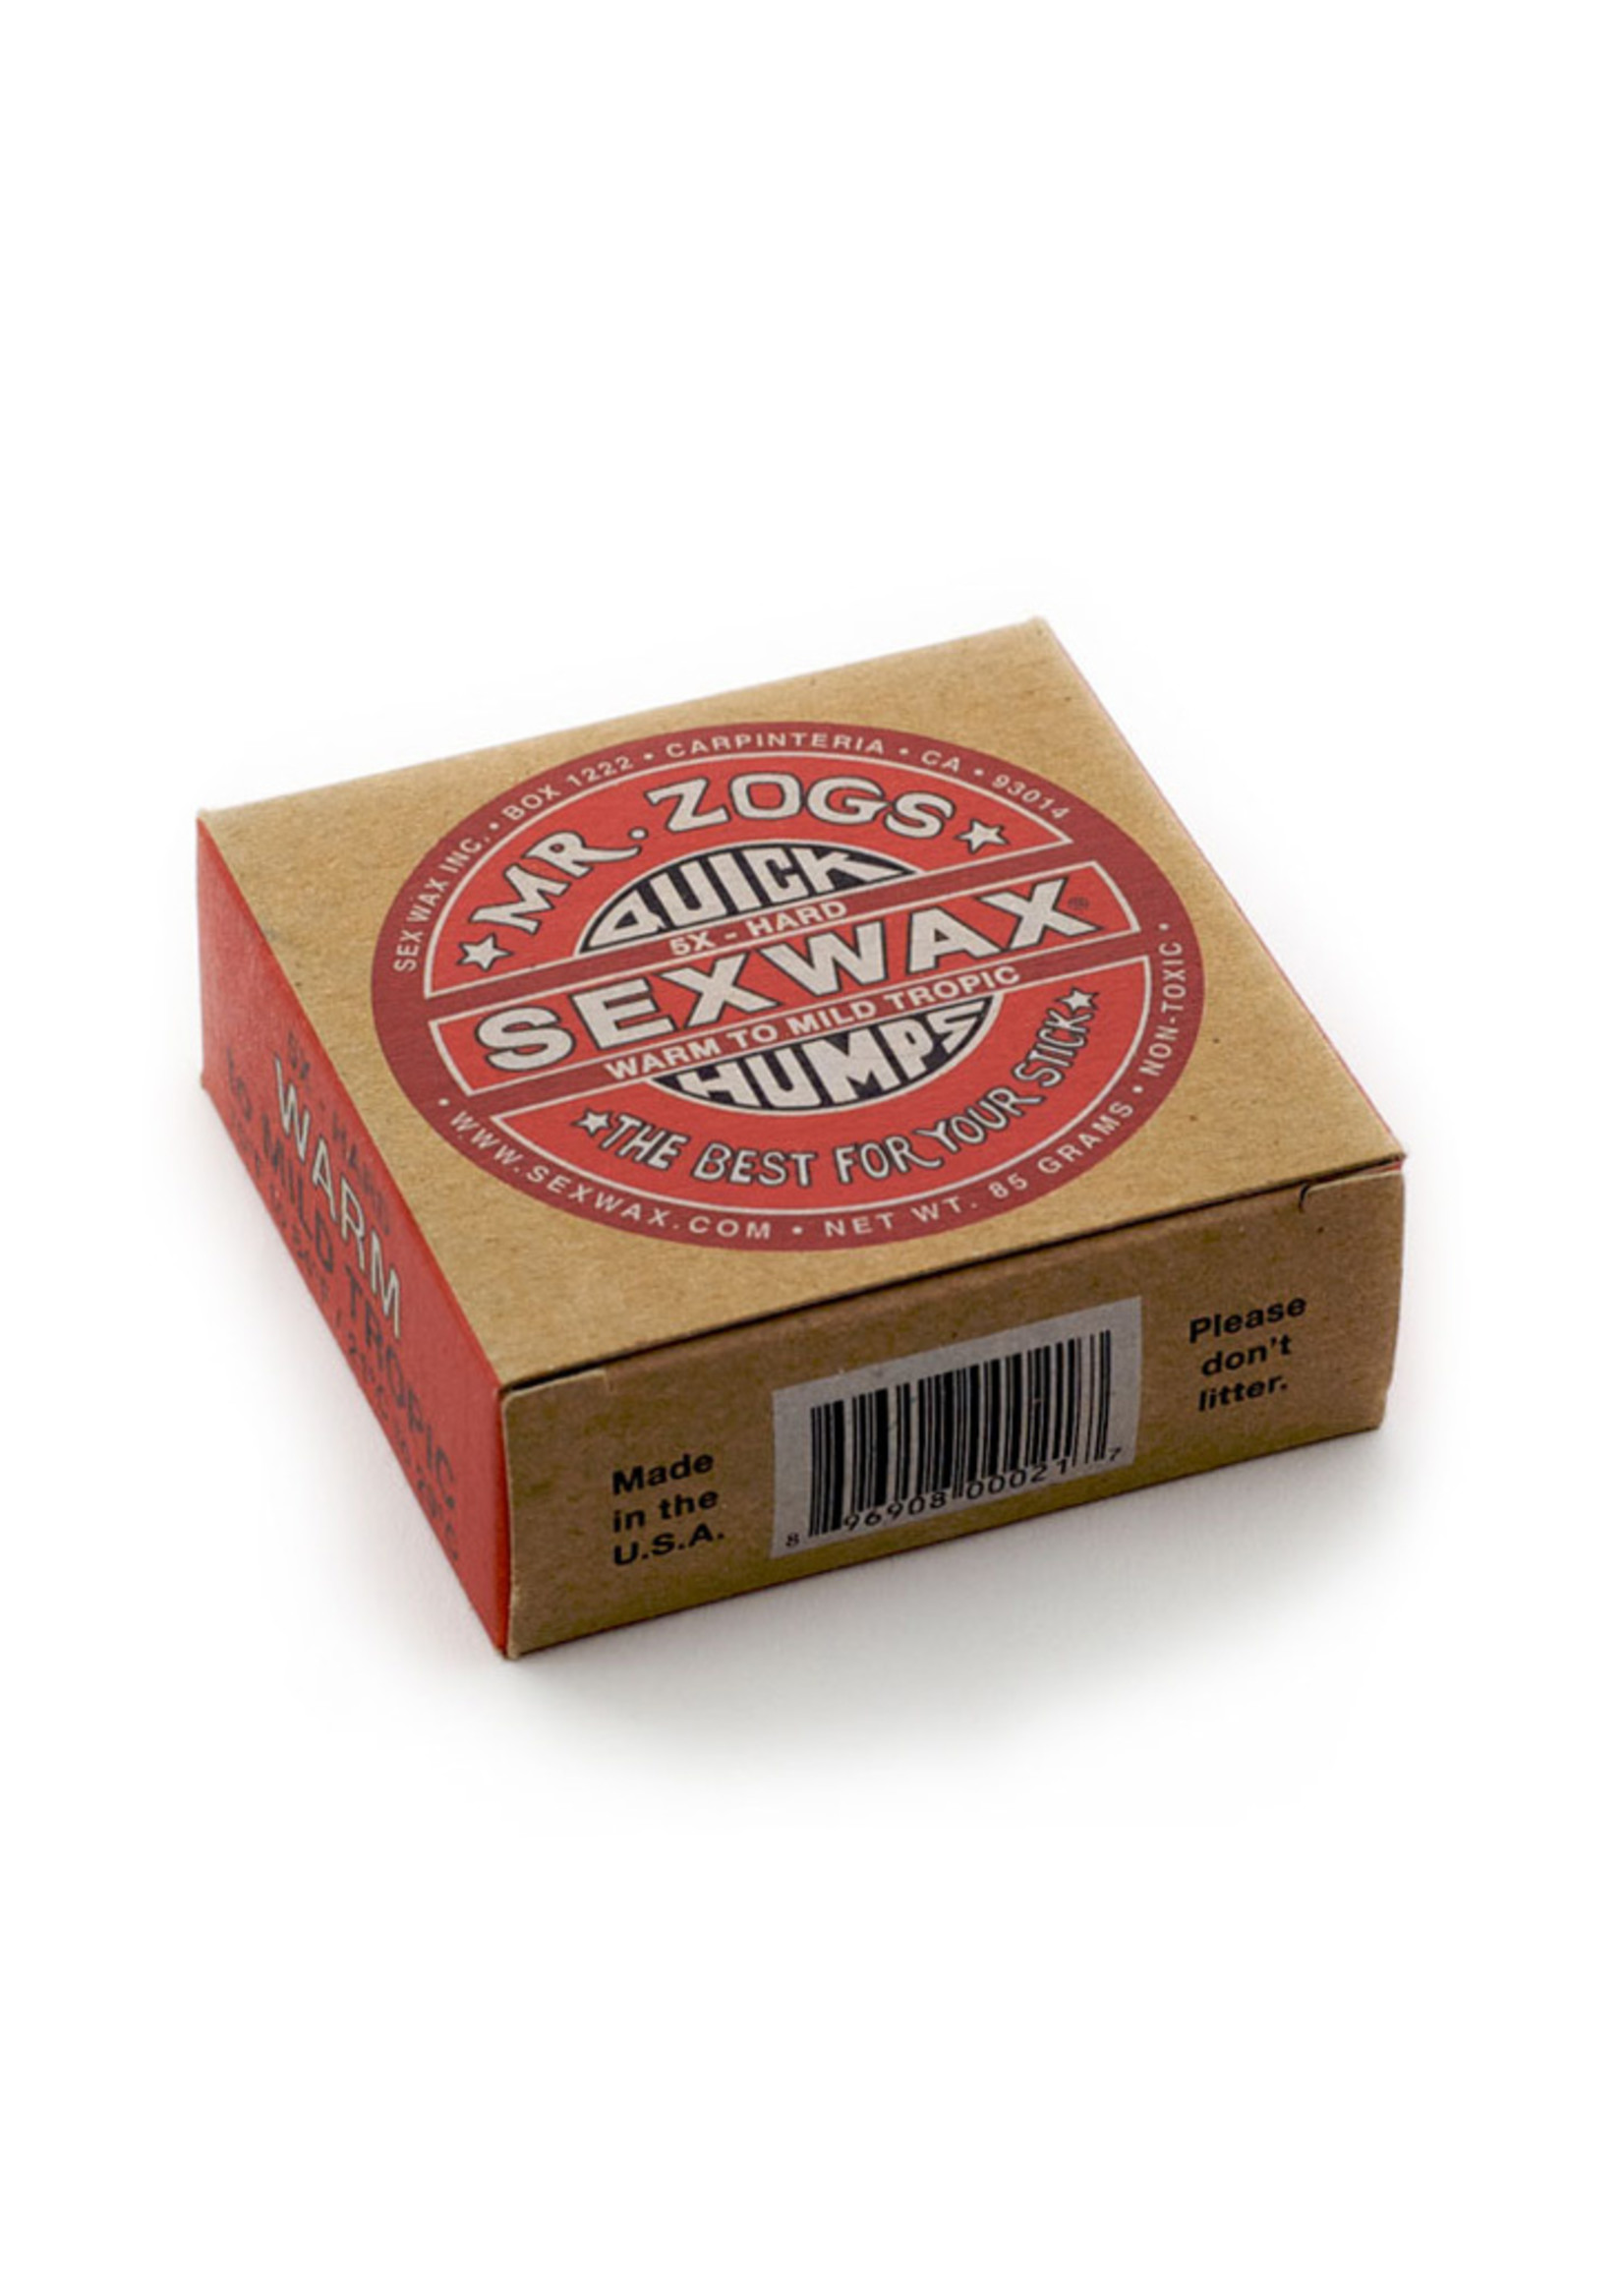 Sex Wax Sex Wax Quick Humps Surfwachs in Eco Box